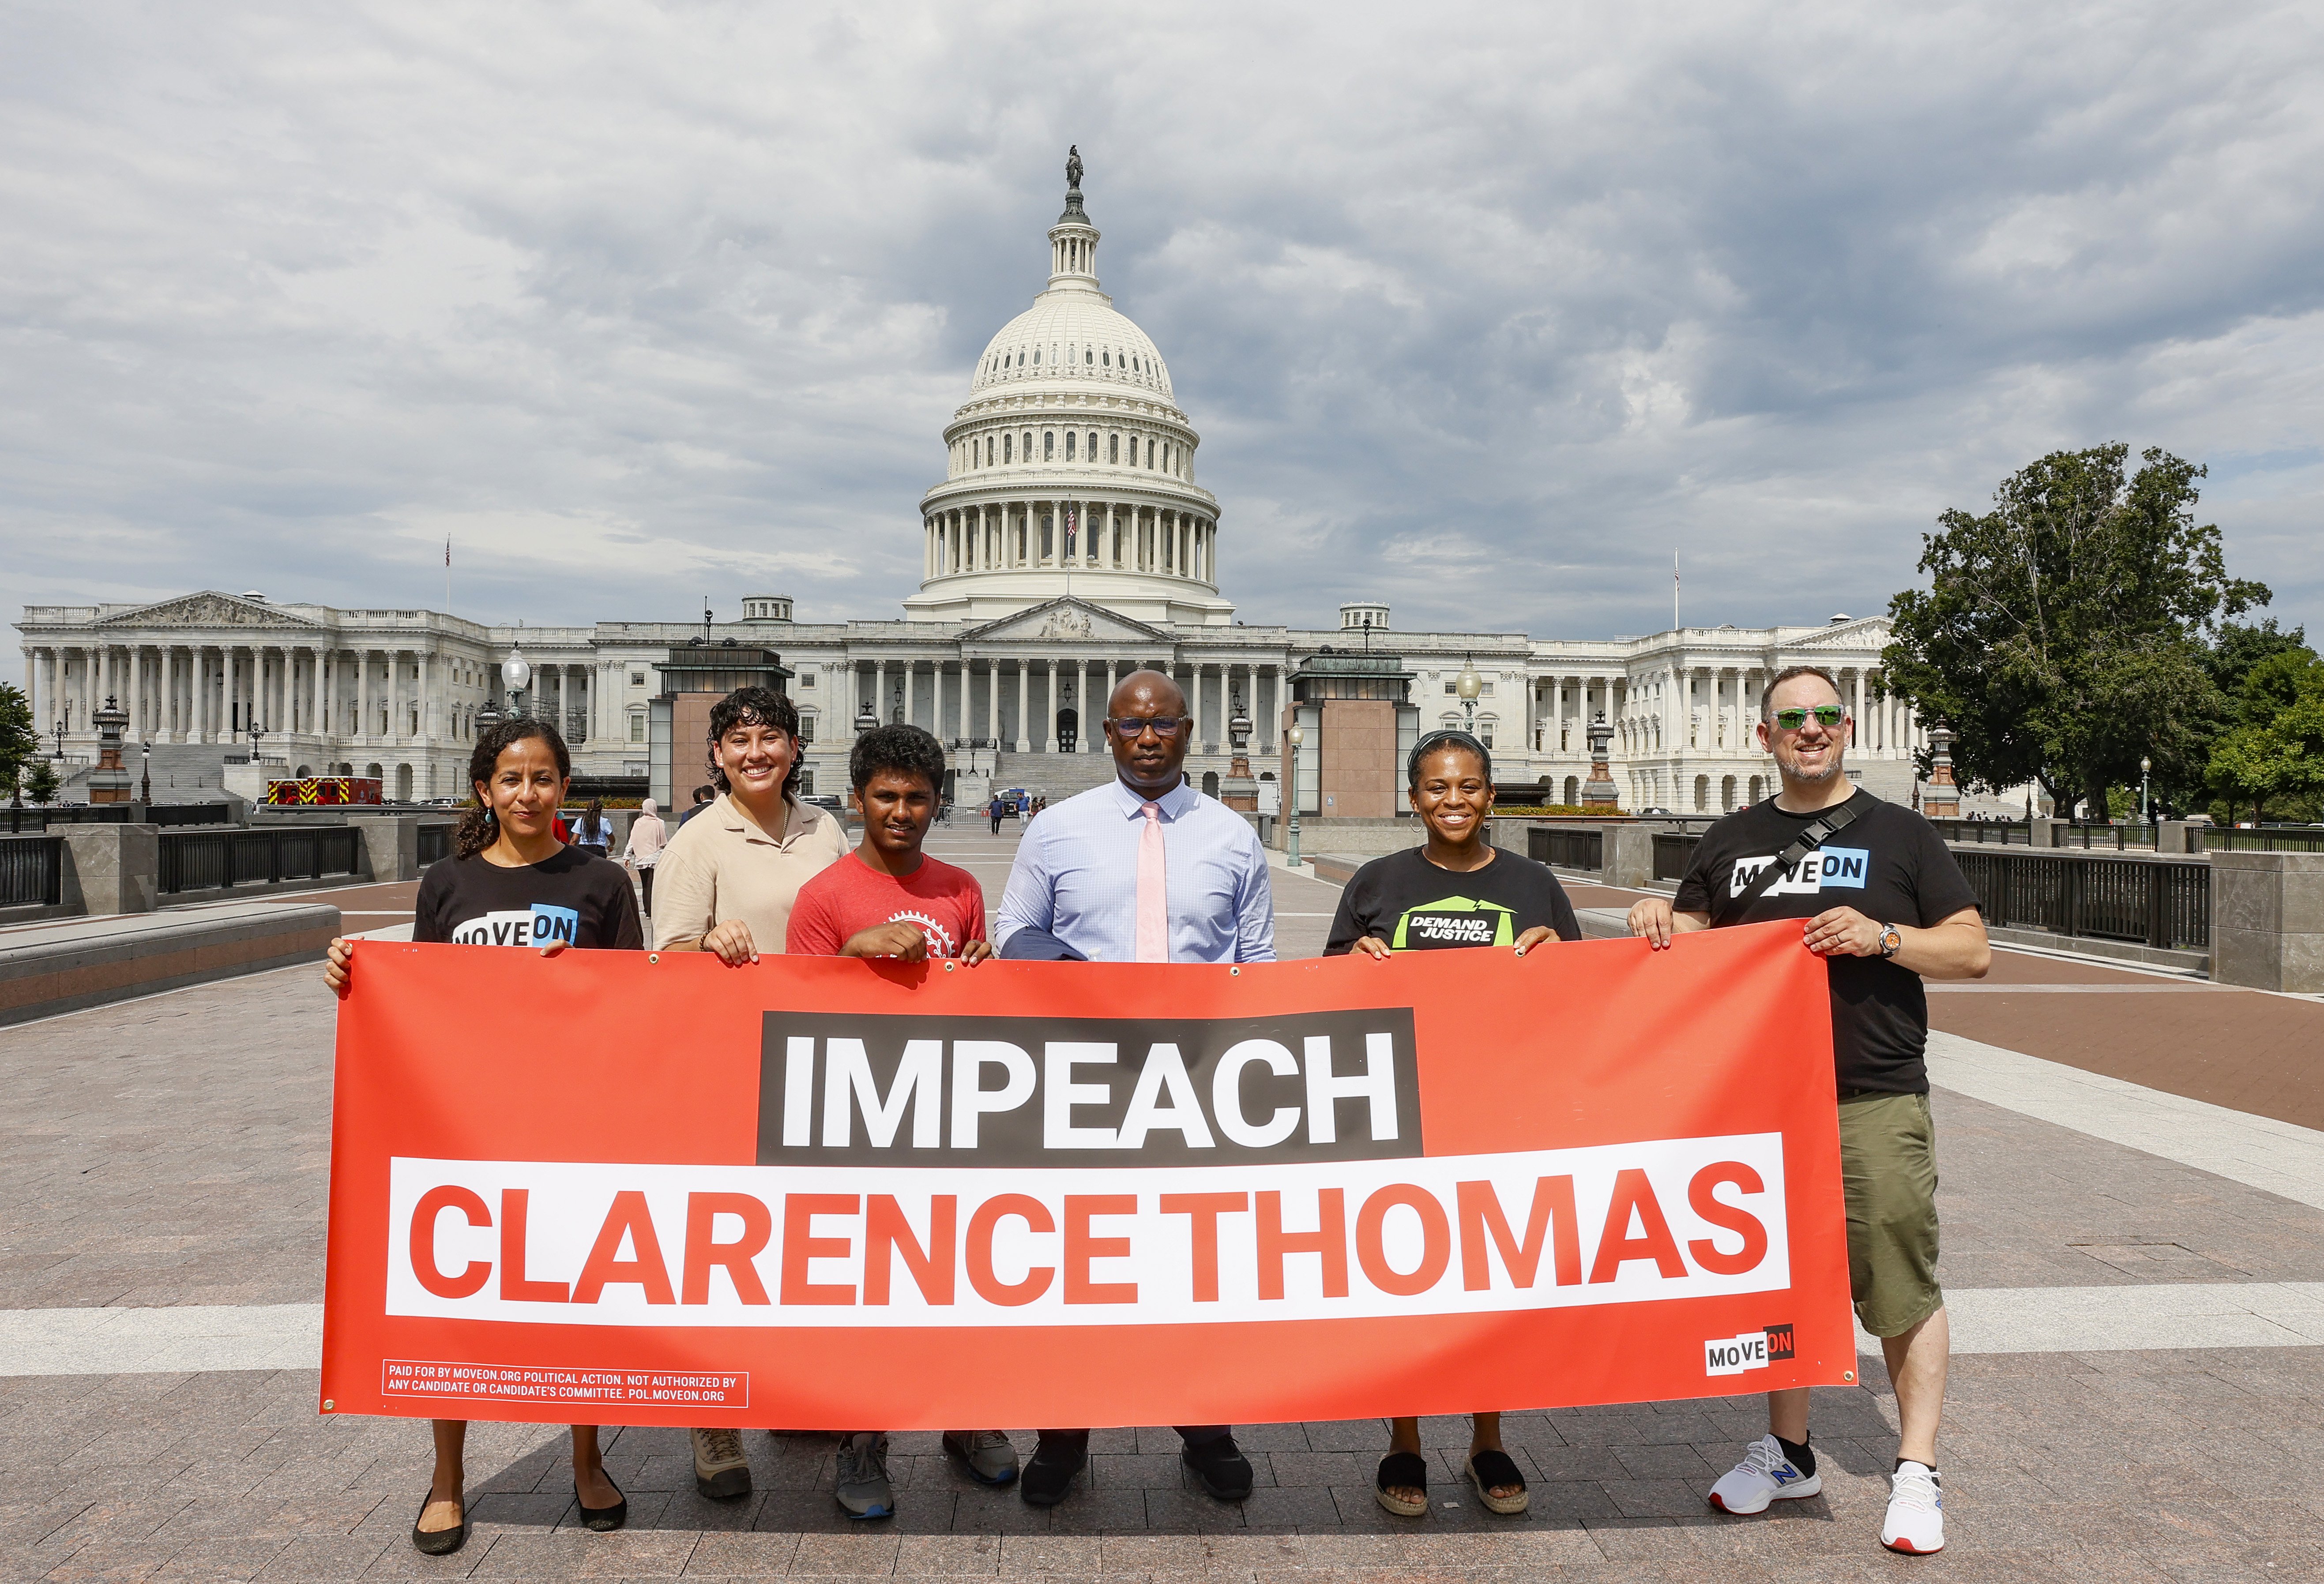 Rep. Jamaal Bowman, Tamara Brummer and Matthew Witten hold up an "Impeach Clarence Thomas" banner outside of the US Capitol after a demonstration in Washington, DC | Source: Getty Images